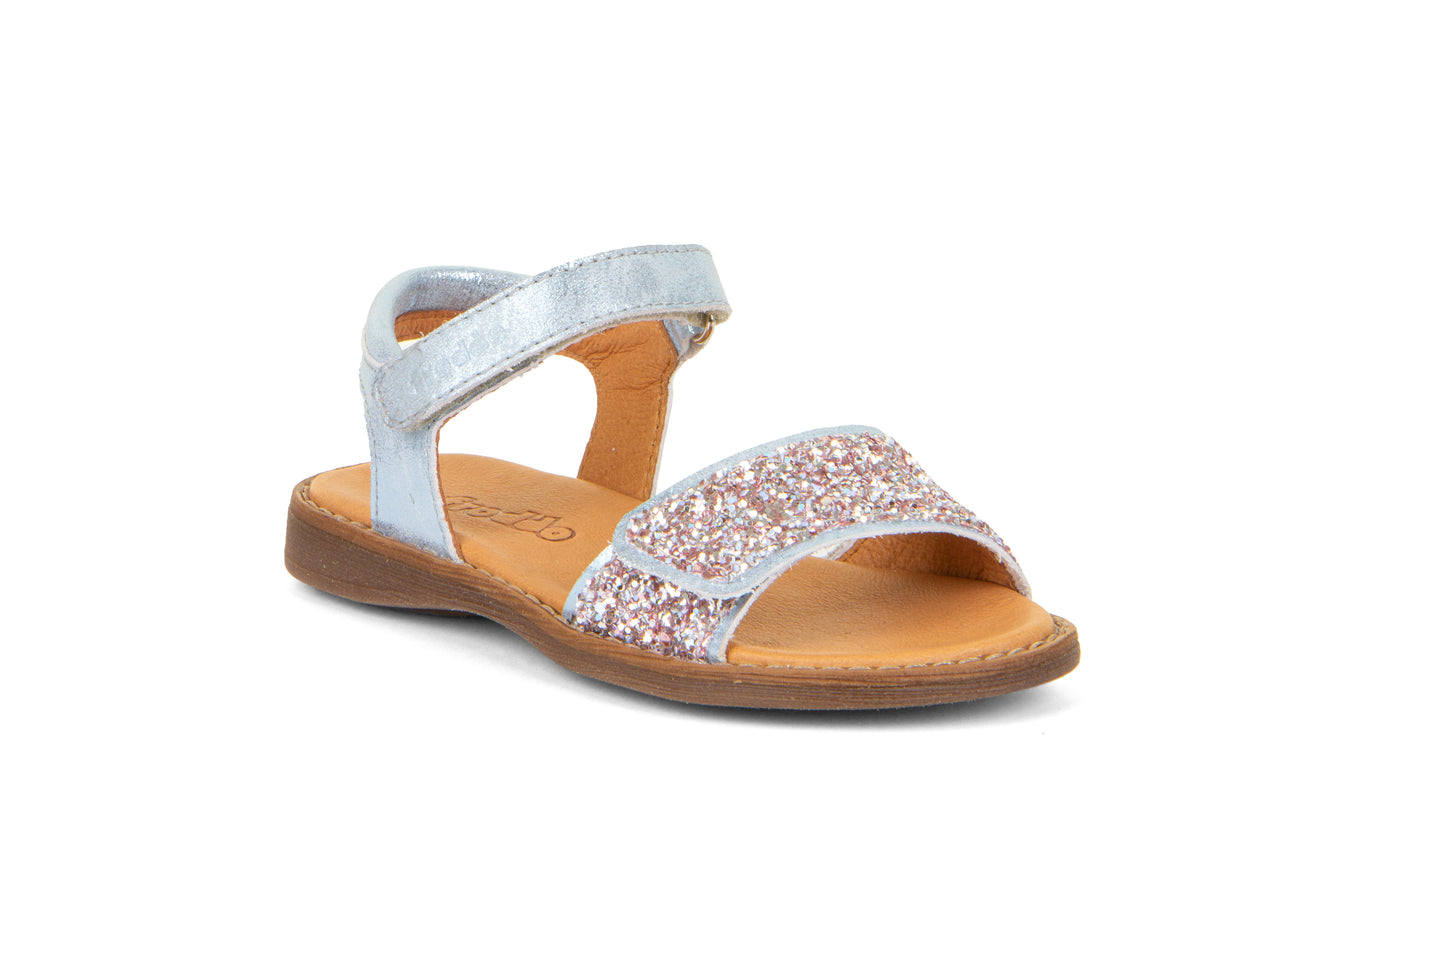  A girls open toe sandal by Froddo,style Lore Sparkle G3150249-10 in silver leather with Glitter velcro strap and velcro ankle fastening. Angle view.